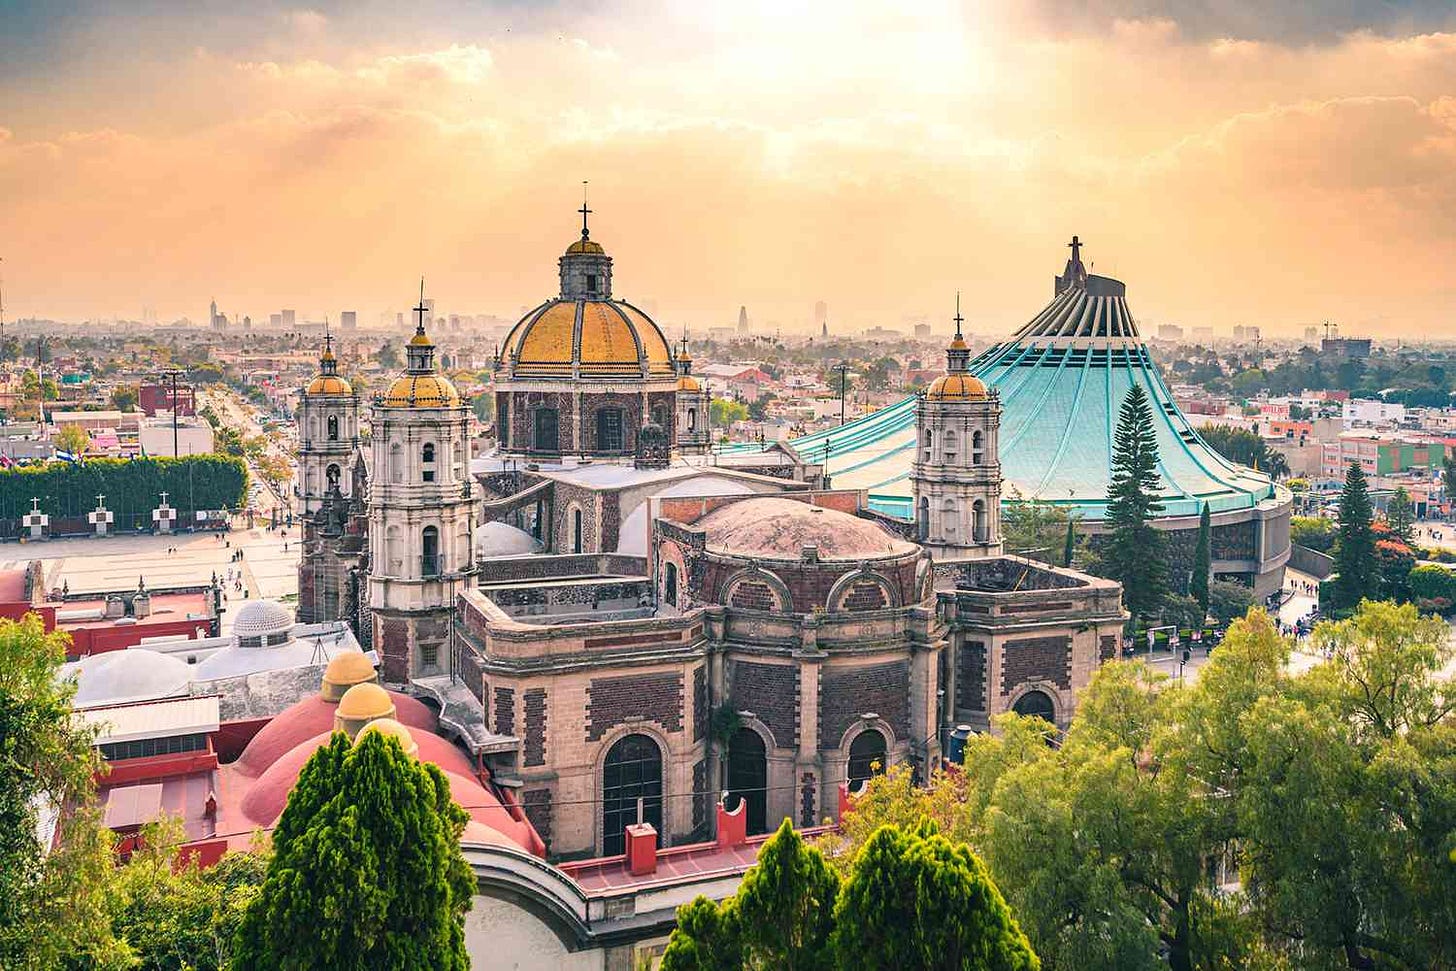 An view of Mexico City from above